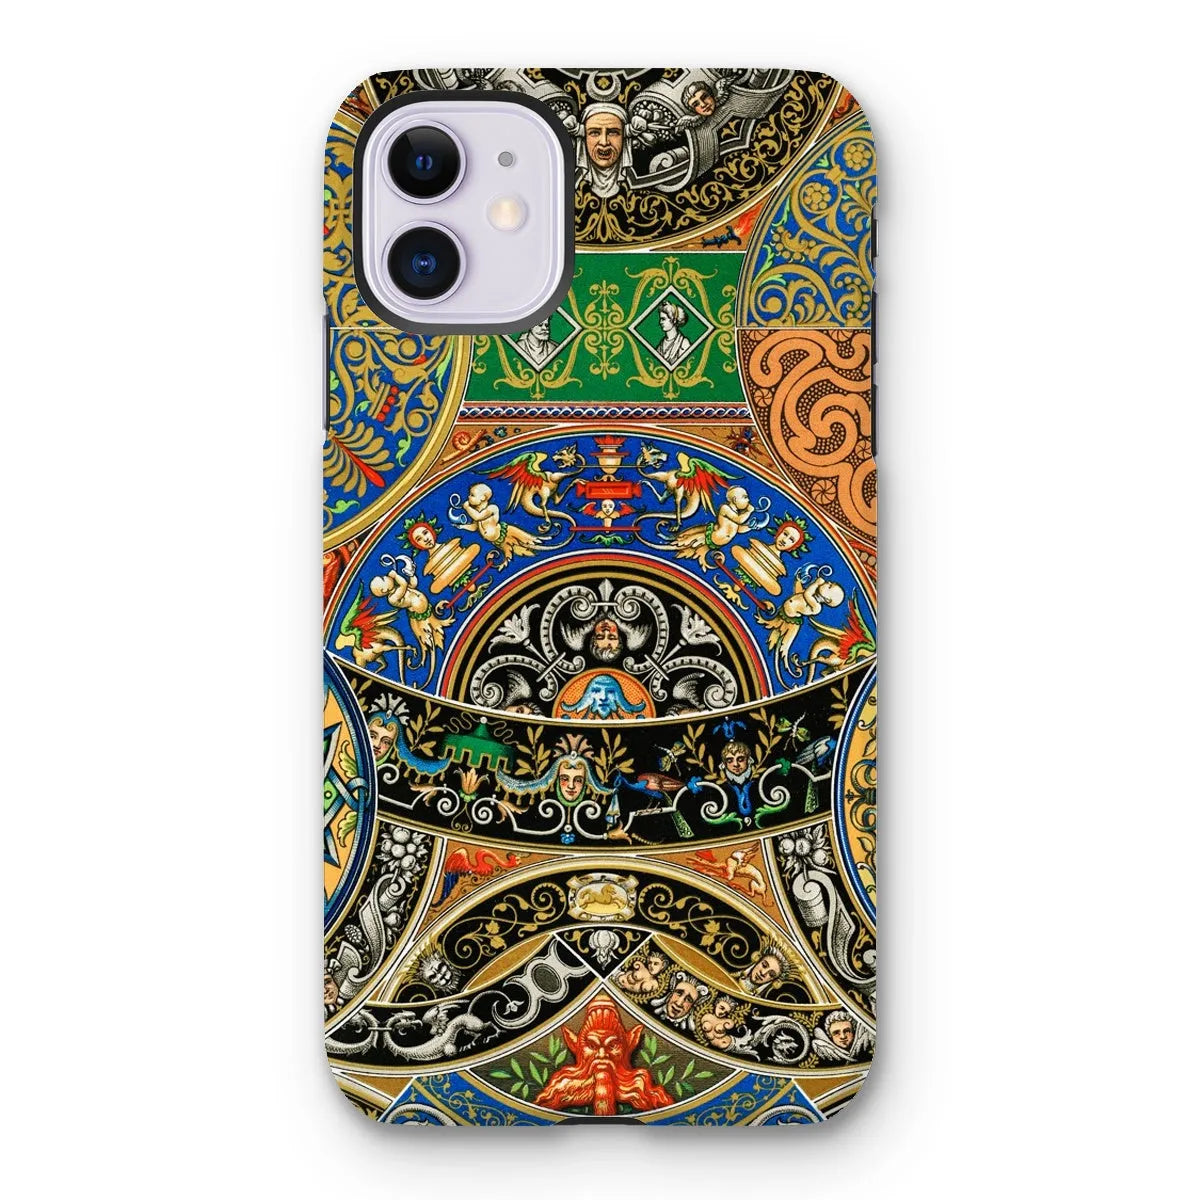 Renaissance Pattern 2 By Auguste Racinet Tough Phone Case - Iphone 11 / Gloss - Mobile Phone Cases - Aesthetic Art